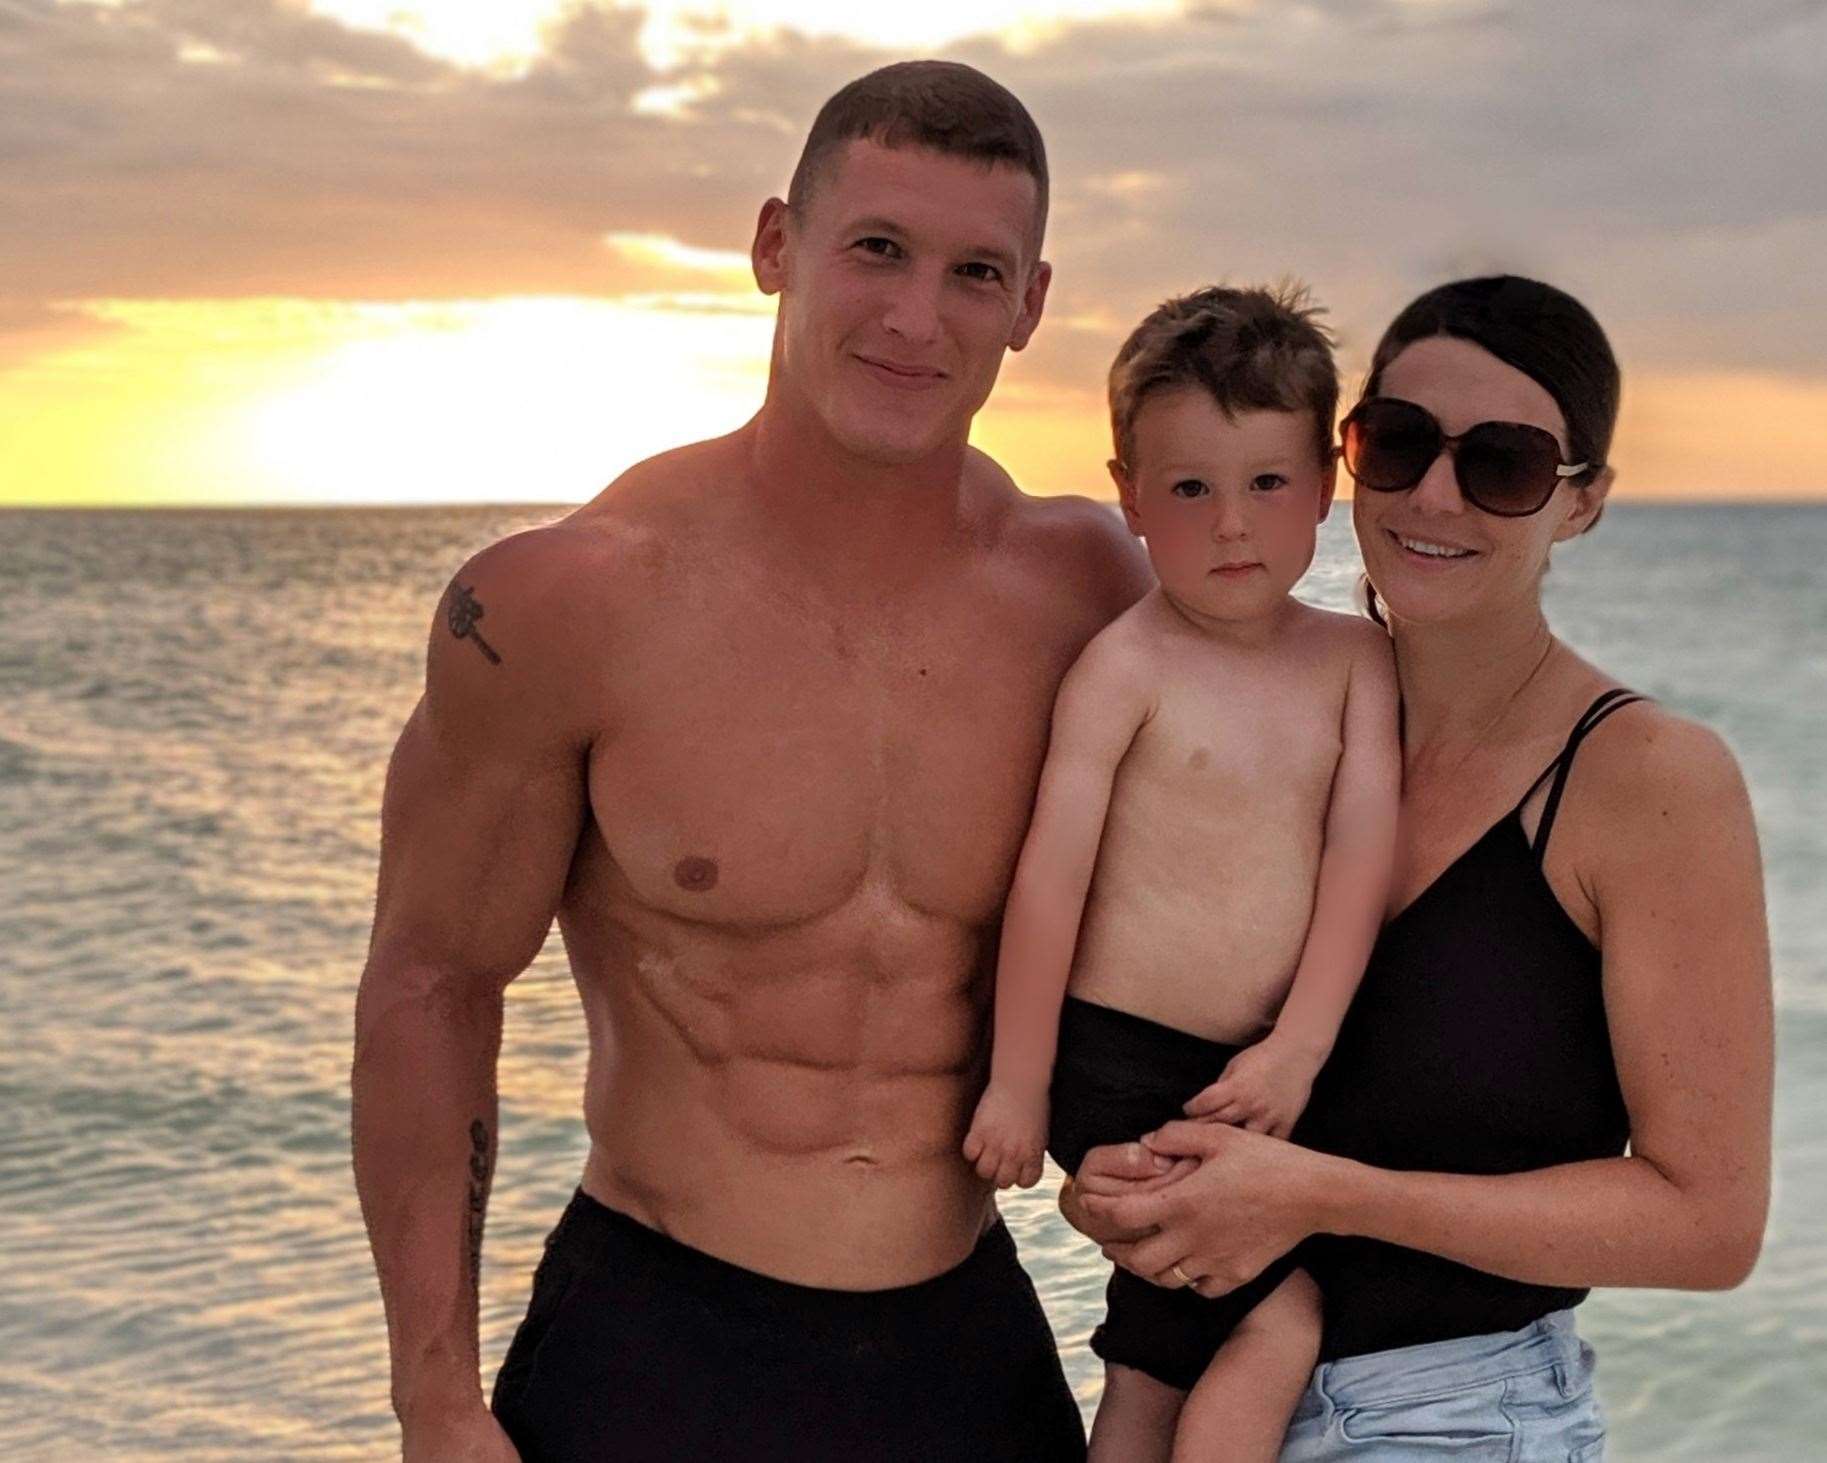 Matt Morsia on holiday with his wife Sarah and their son Luca